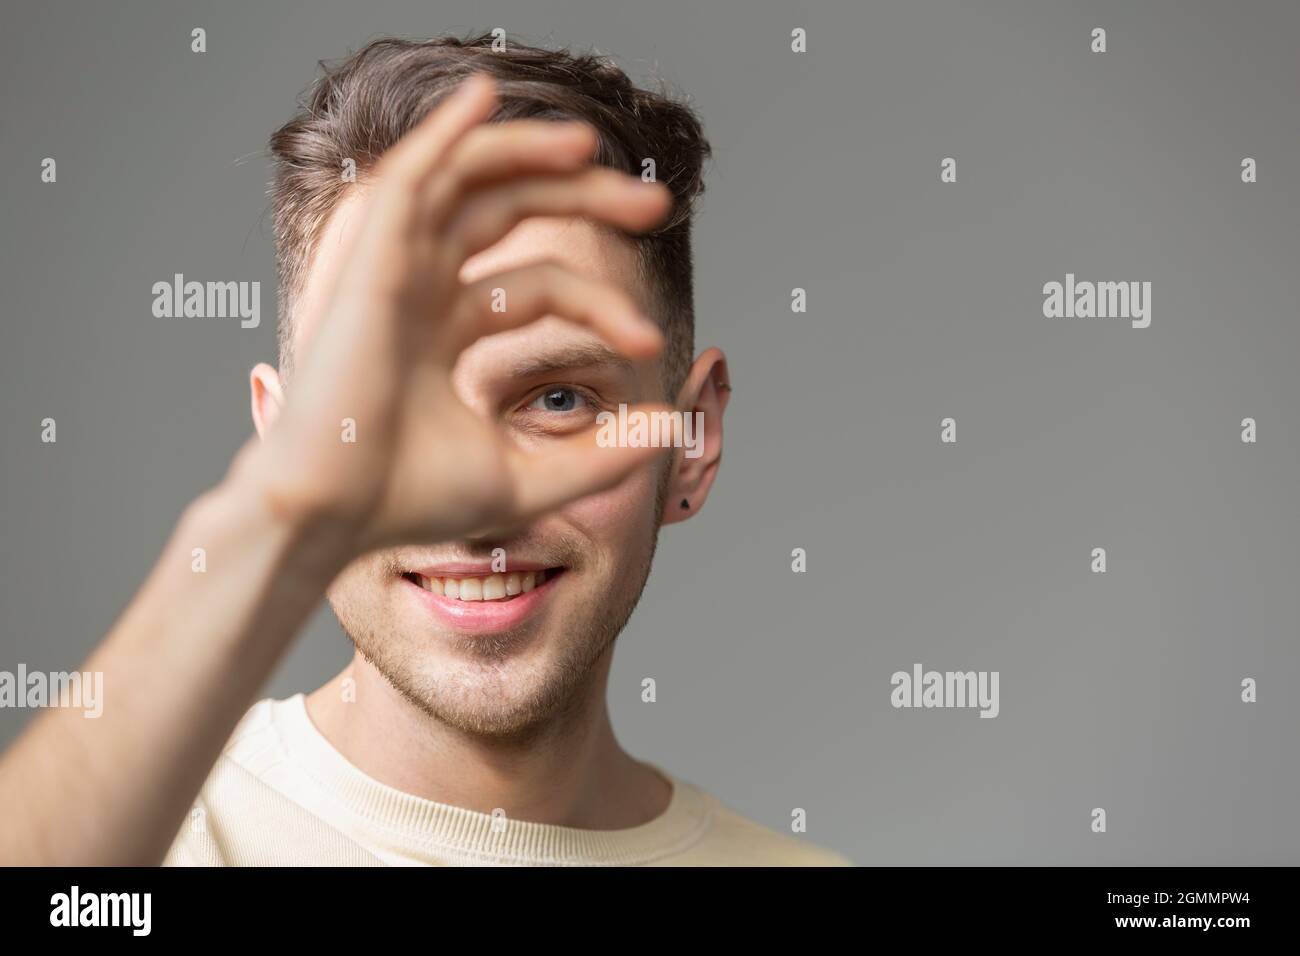 Portrait happy young man gesturing Stock Photo